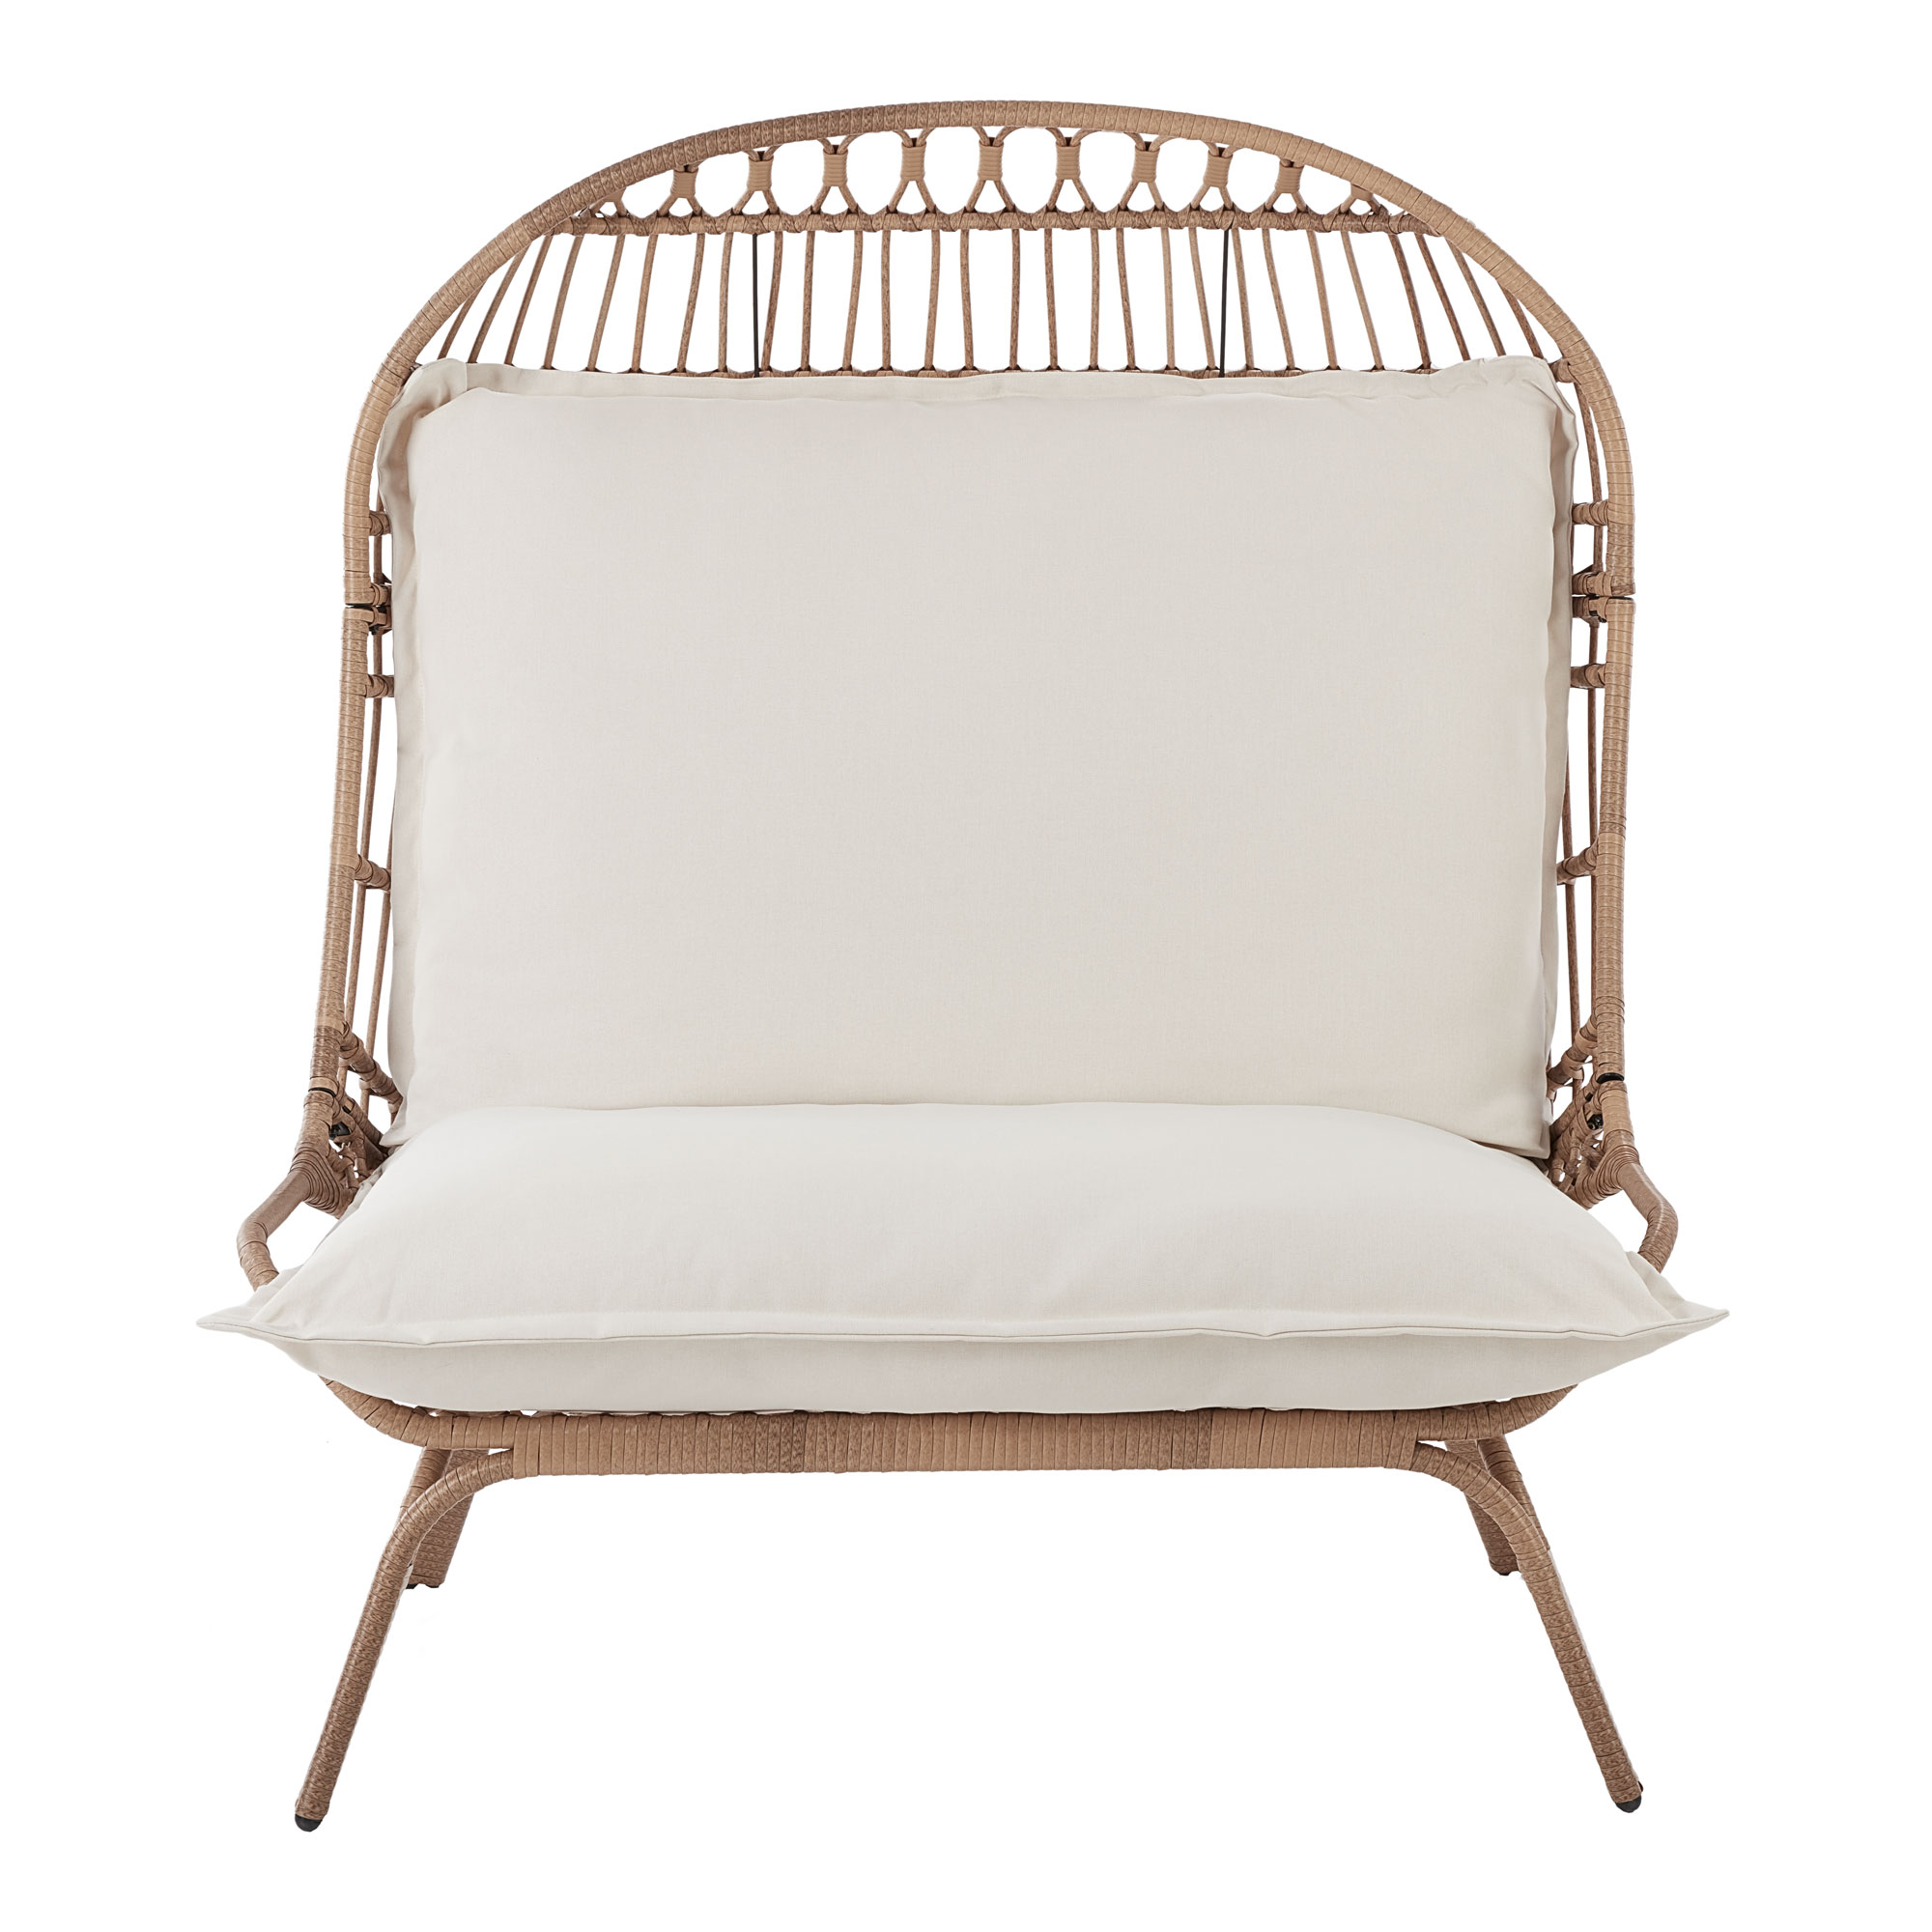 Better Homes & Gardens Willow Sage Steel Wicker Patio Cuddle Chair, Brown - image 3 of 8